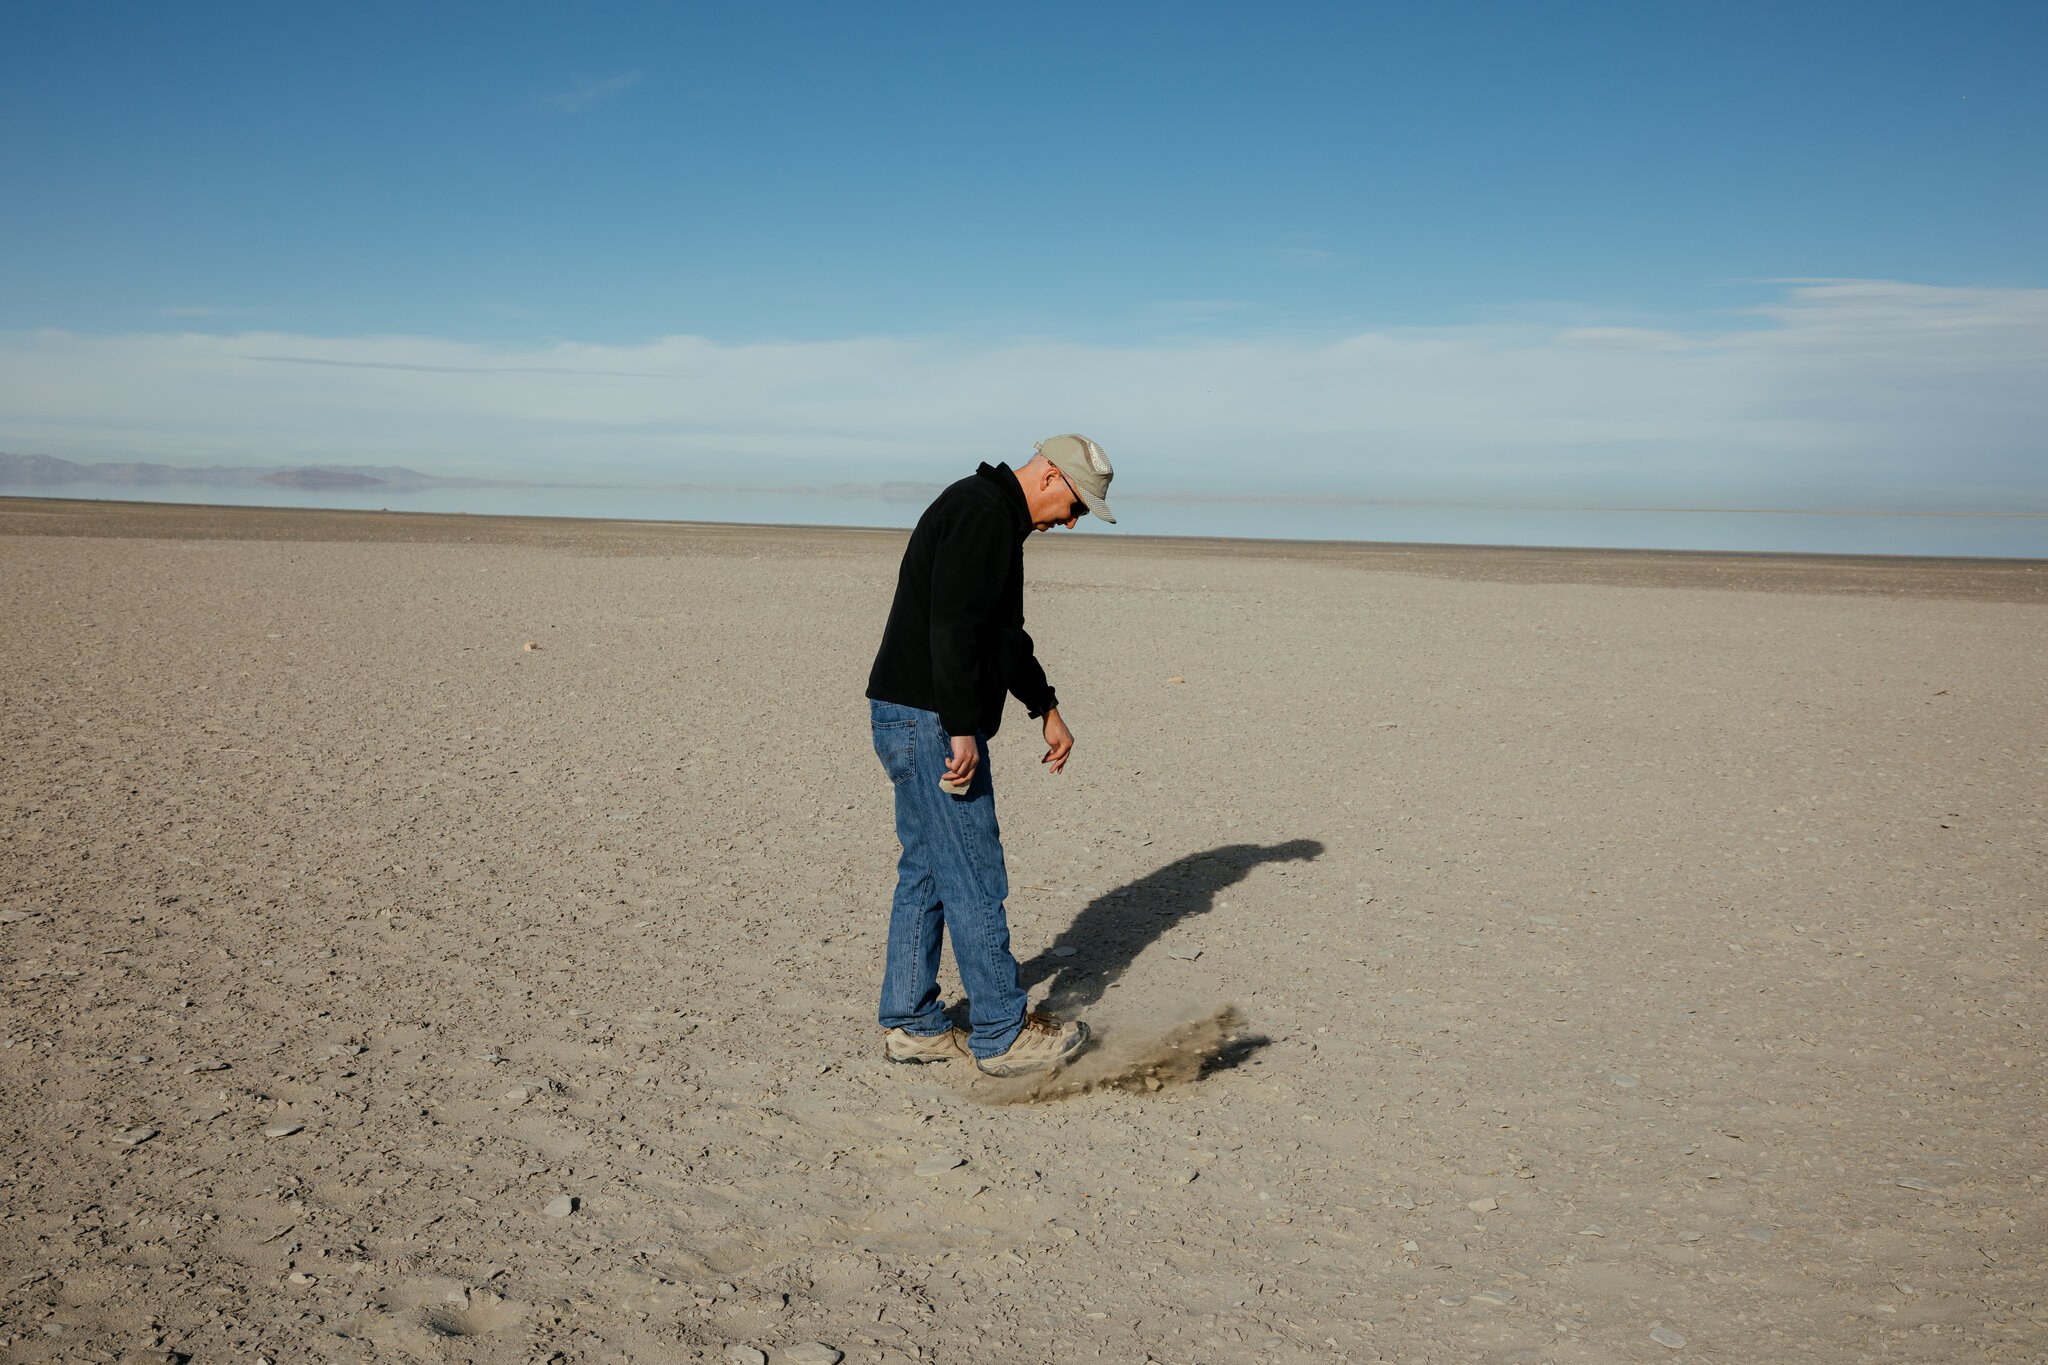 Kevin Perry, a professor of atmospheric sciences at the University of Utah, on land that used to be submerged by the Great Salt Lake. Photo: Bryan Tarnowski / The New York Times